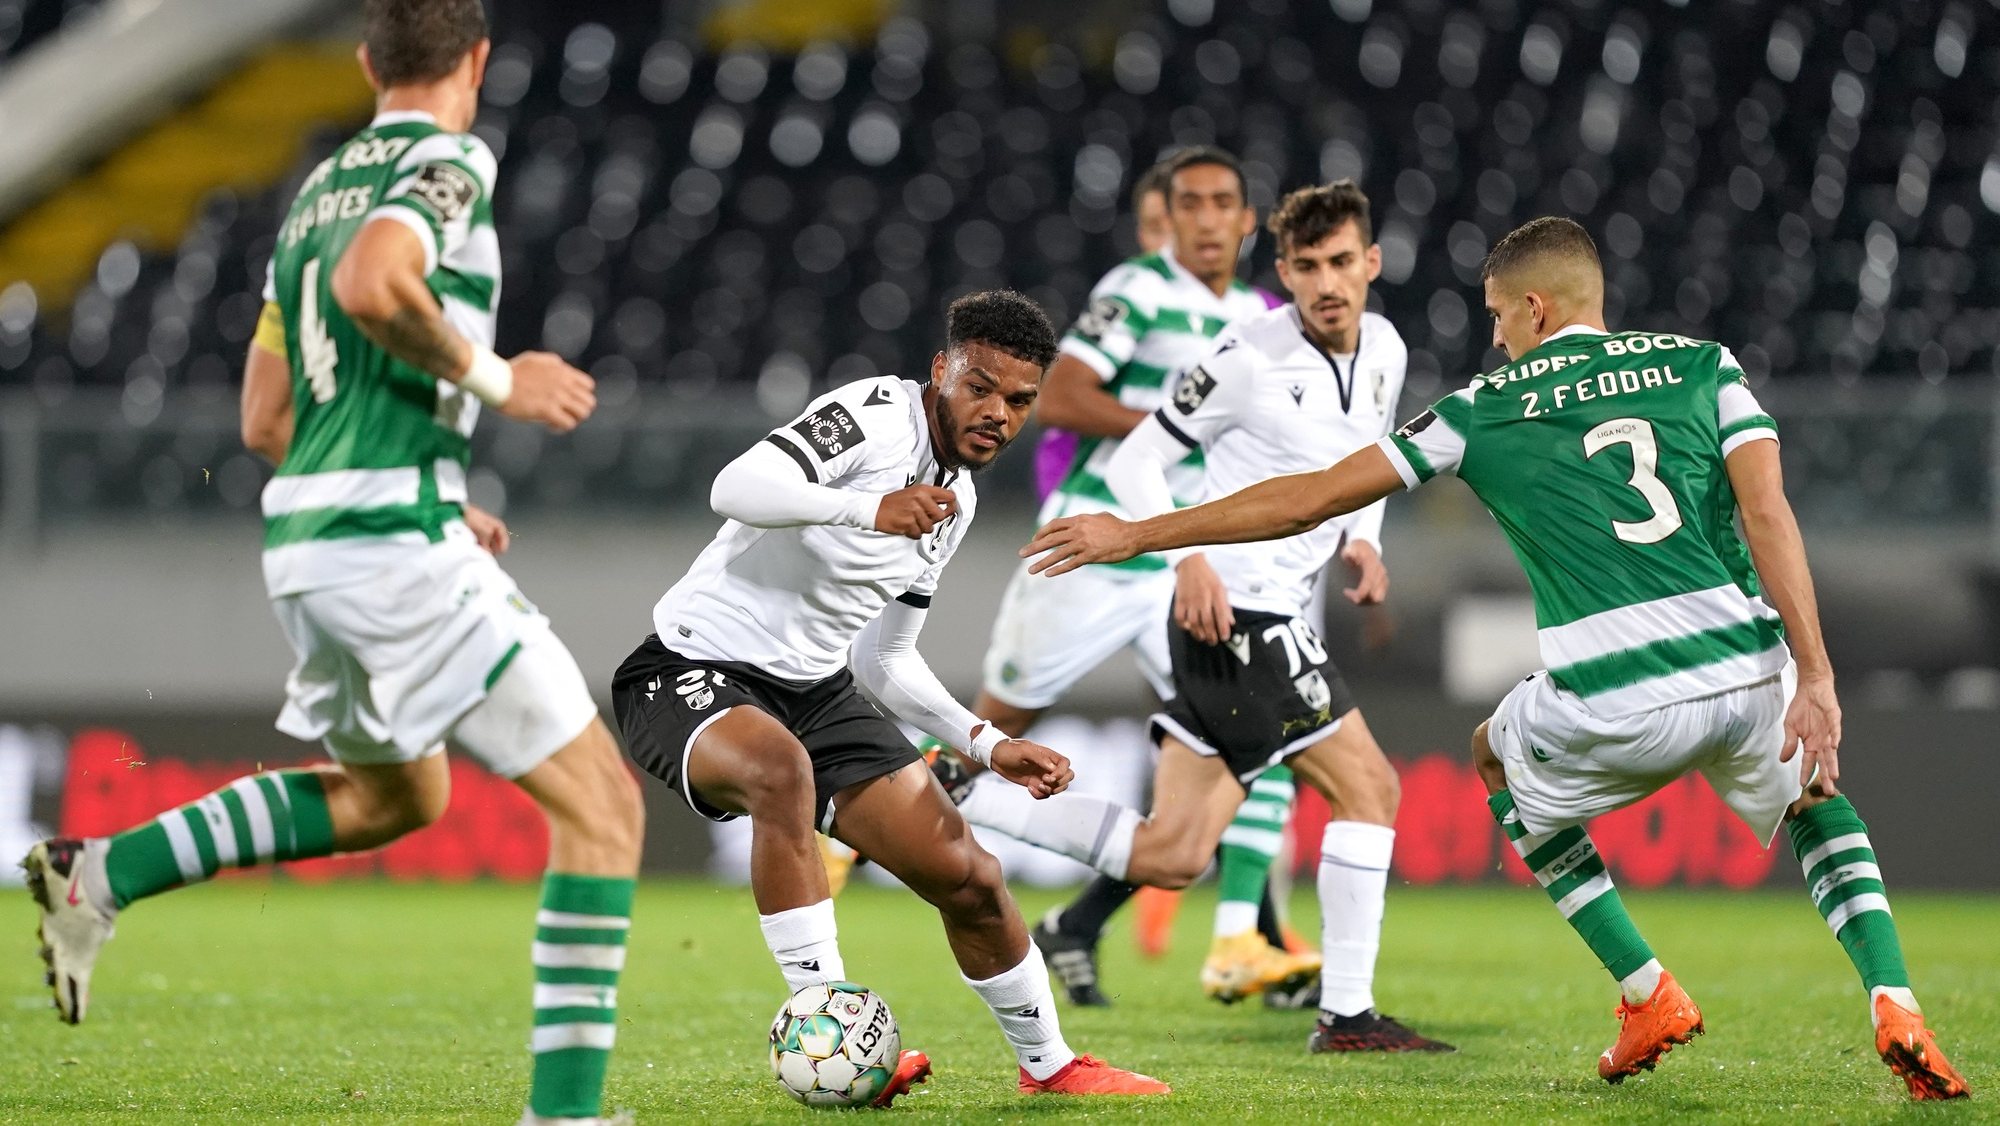 Vitoria de Guimaraes´s Lyle Foster (2-L) vies for the ball with Sporting´s Zouhair Feaal (R) during their Portuguese First League soccer match held at D. Afonso Henriques stadium in Guimaraes, Portugal, 07 November 2020. HUGO DELGADO/LUSA